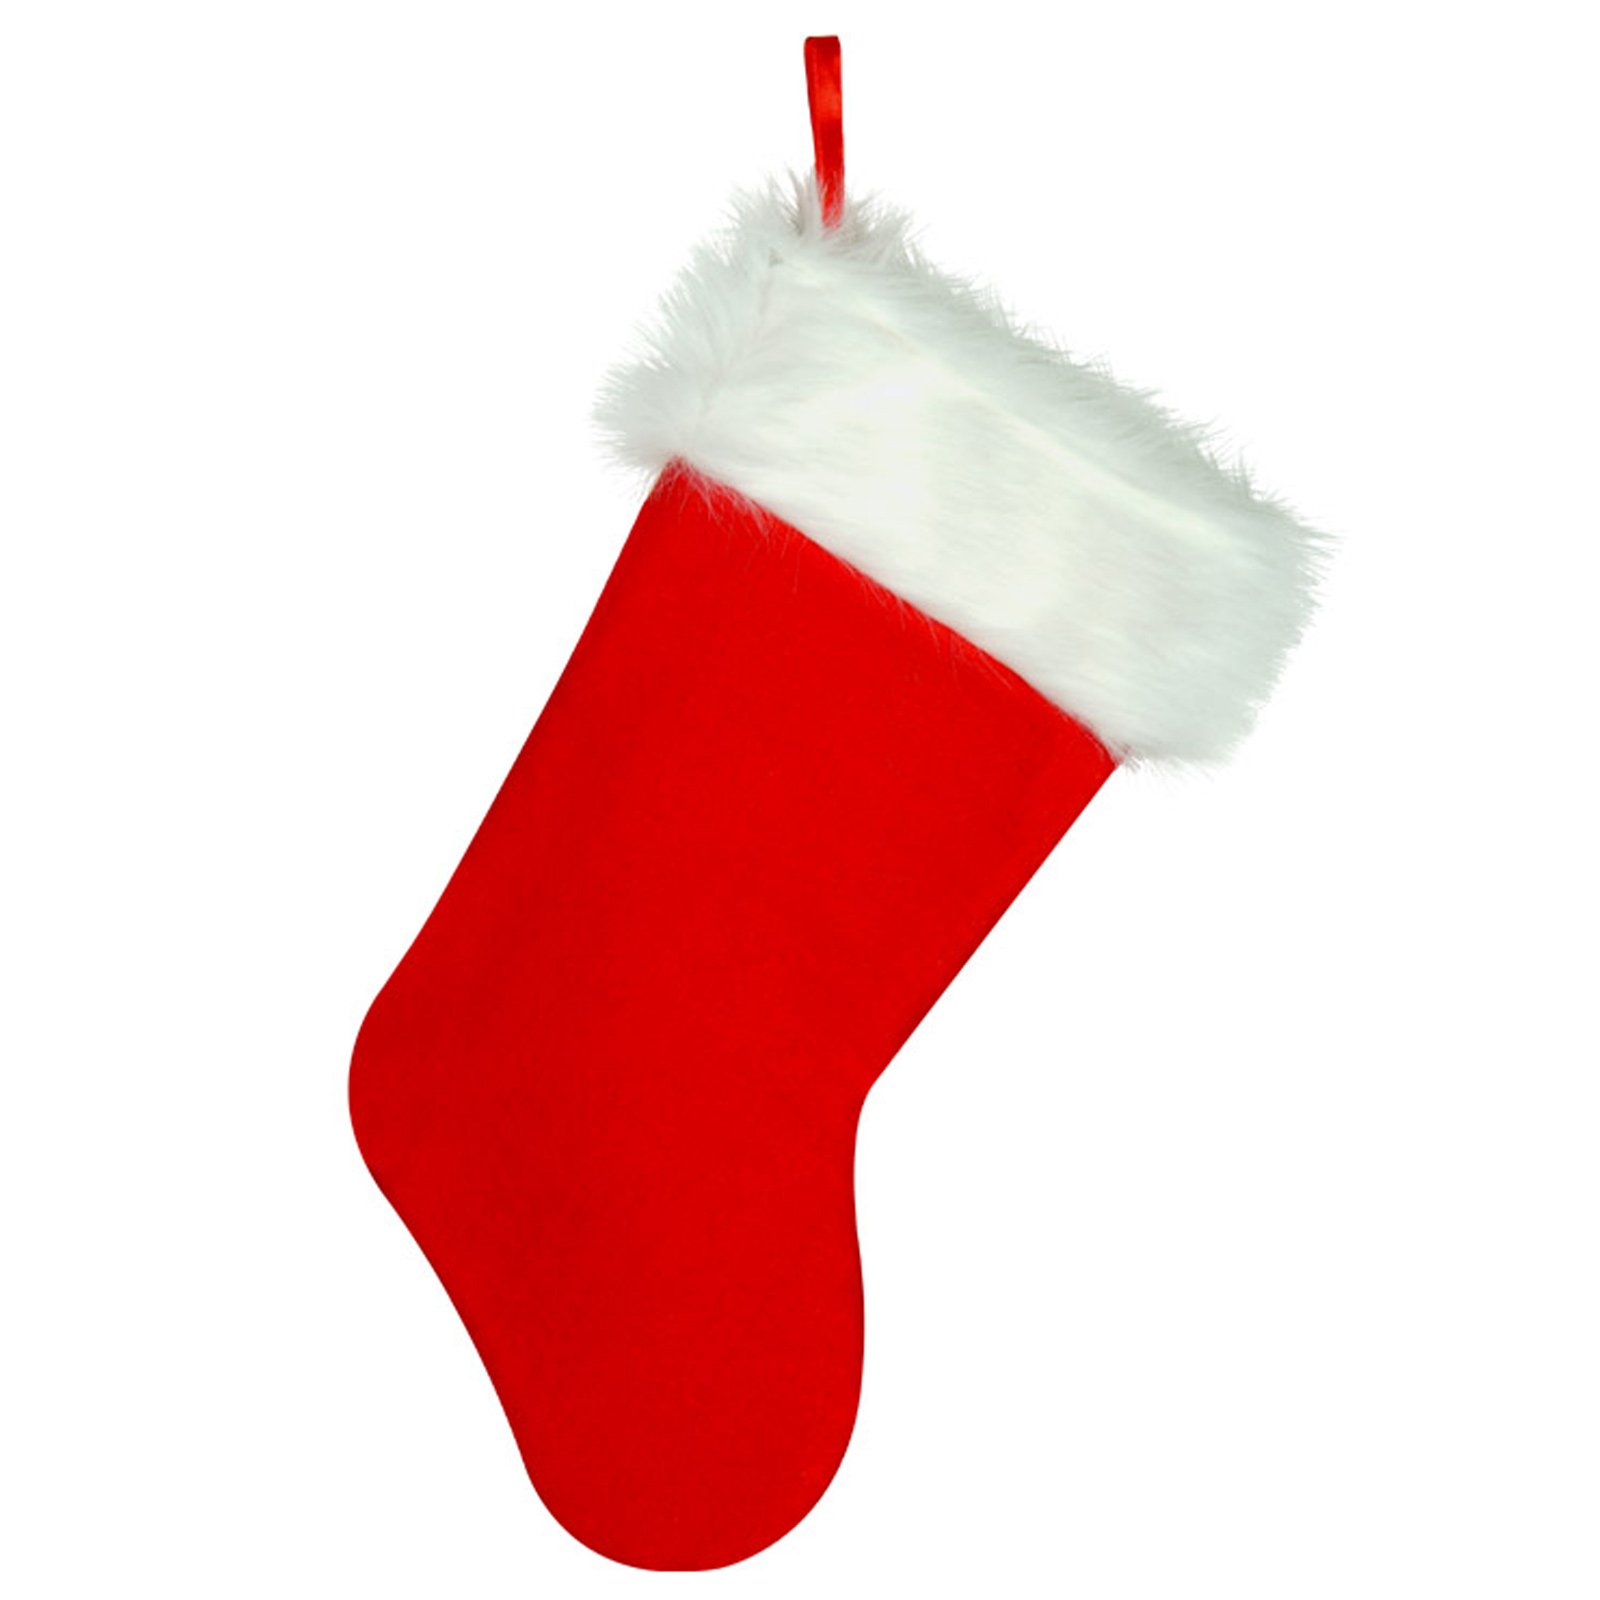 Pics Of Christmas Stockings - ClipArt Best